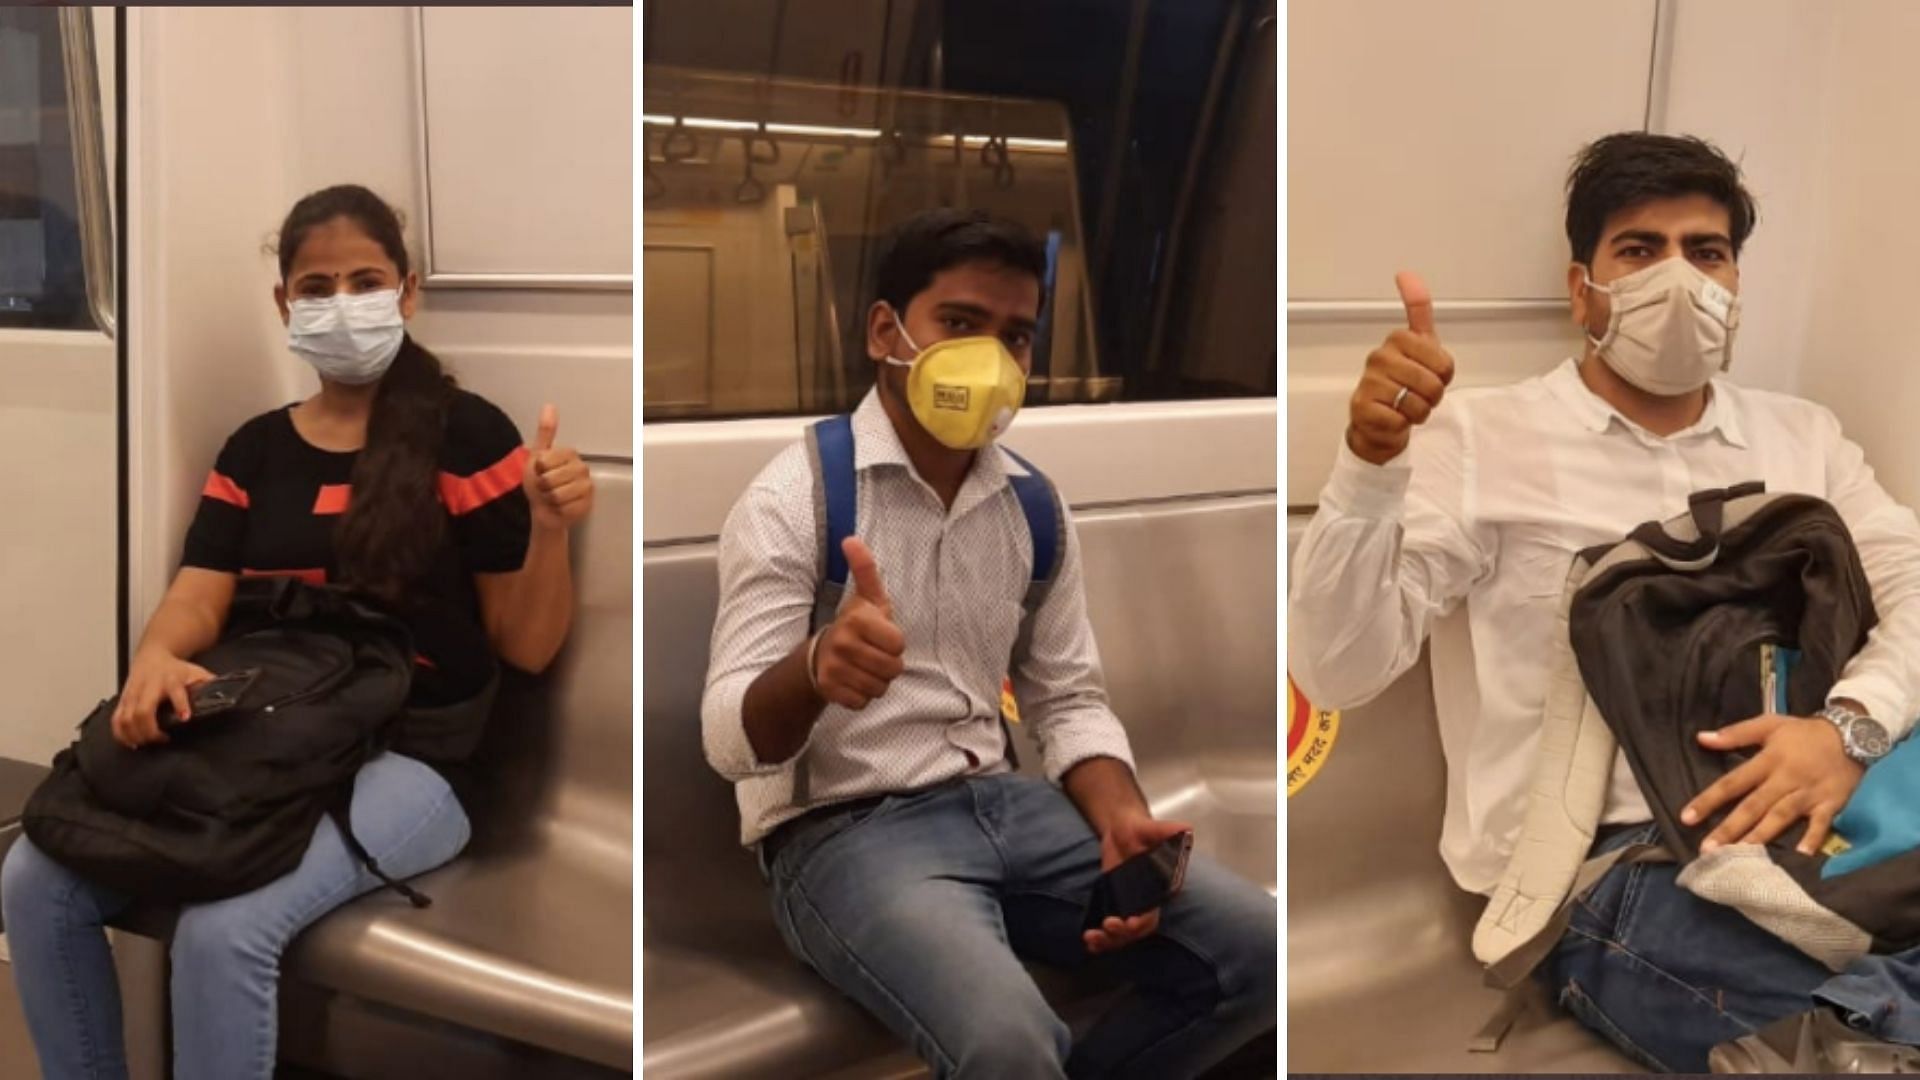 DMRC celebrated the return of “a few happy faces”.